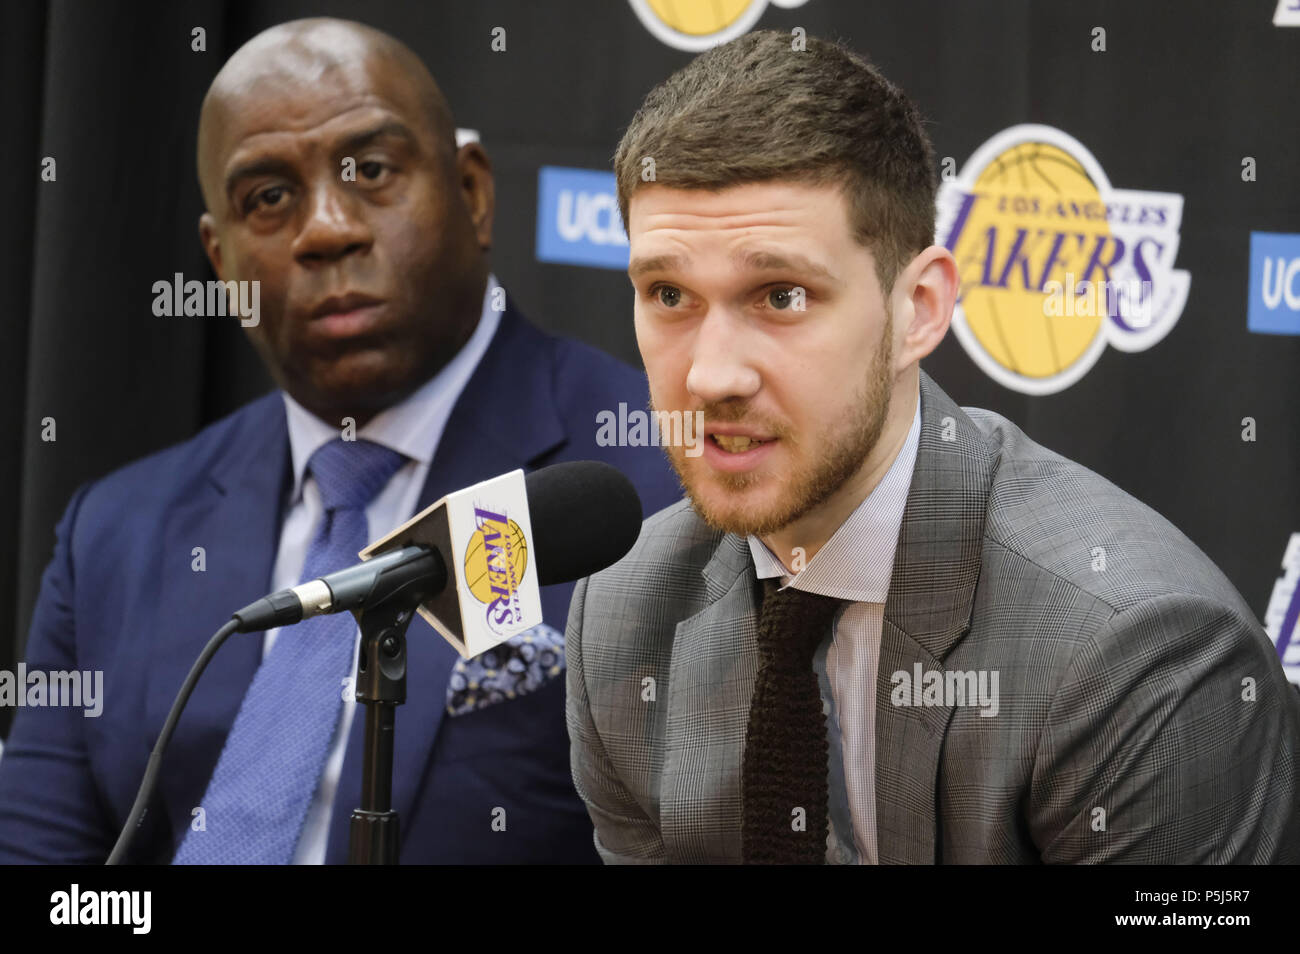 Los Angeles, California, USA. 26th June, 2018. Los Angeles Lakers president of basketball operations, Earvin ''Magic'' Johnson, left, and rookie Sviatoslav Mykhailiuk at an introductory press conference in Los Angeles, Tuesday, June 26, 2018. The Lakers introduce two new draft players, Moritz Wagner, originally from Germany, the 25th pick in the 2018 NBA Draft and guard Sviatoslav Mykhailiuk, originally from Ukraine. Credit: Ringo Chiu/ZUMA Wire/Alamy Live News Stock Photo